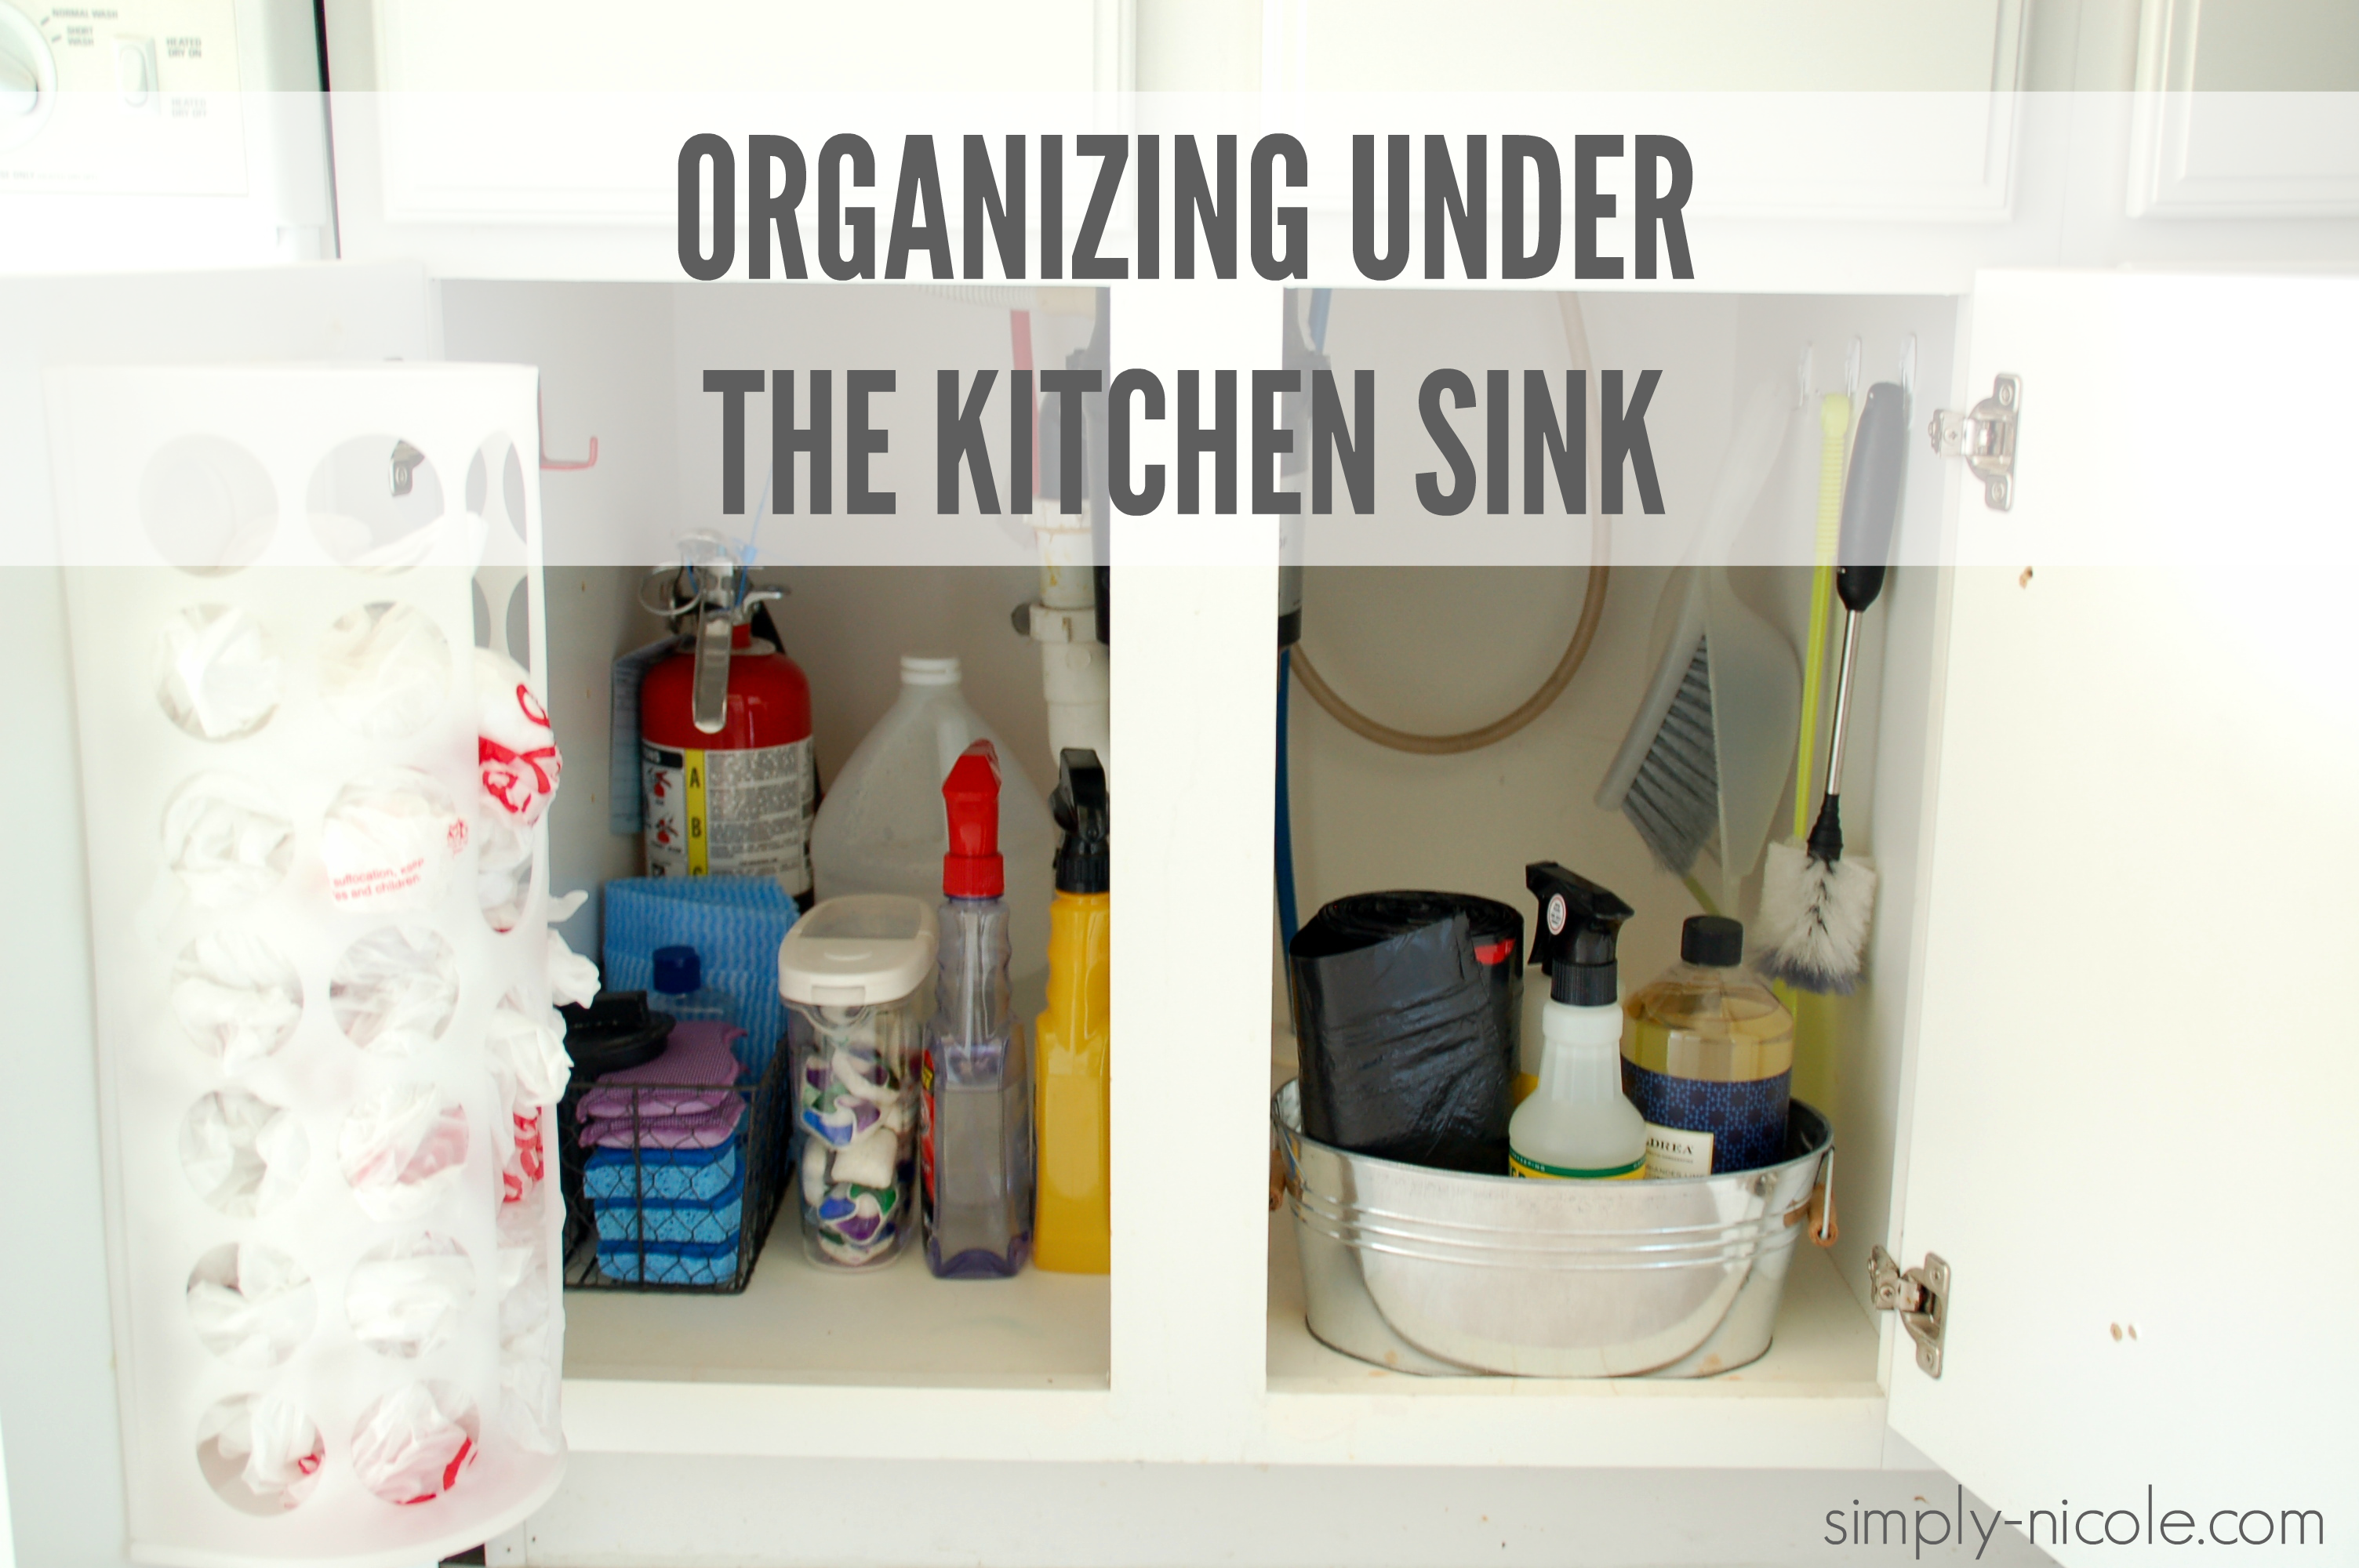 Organizing under the kitchen sink at simply-nicole.com